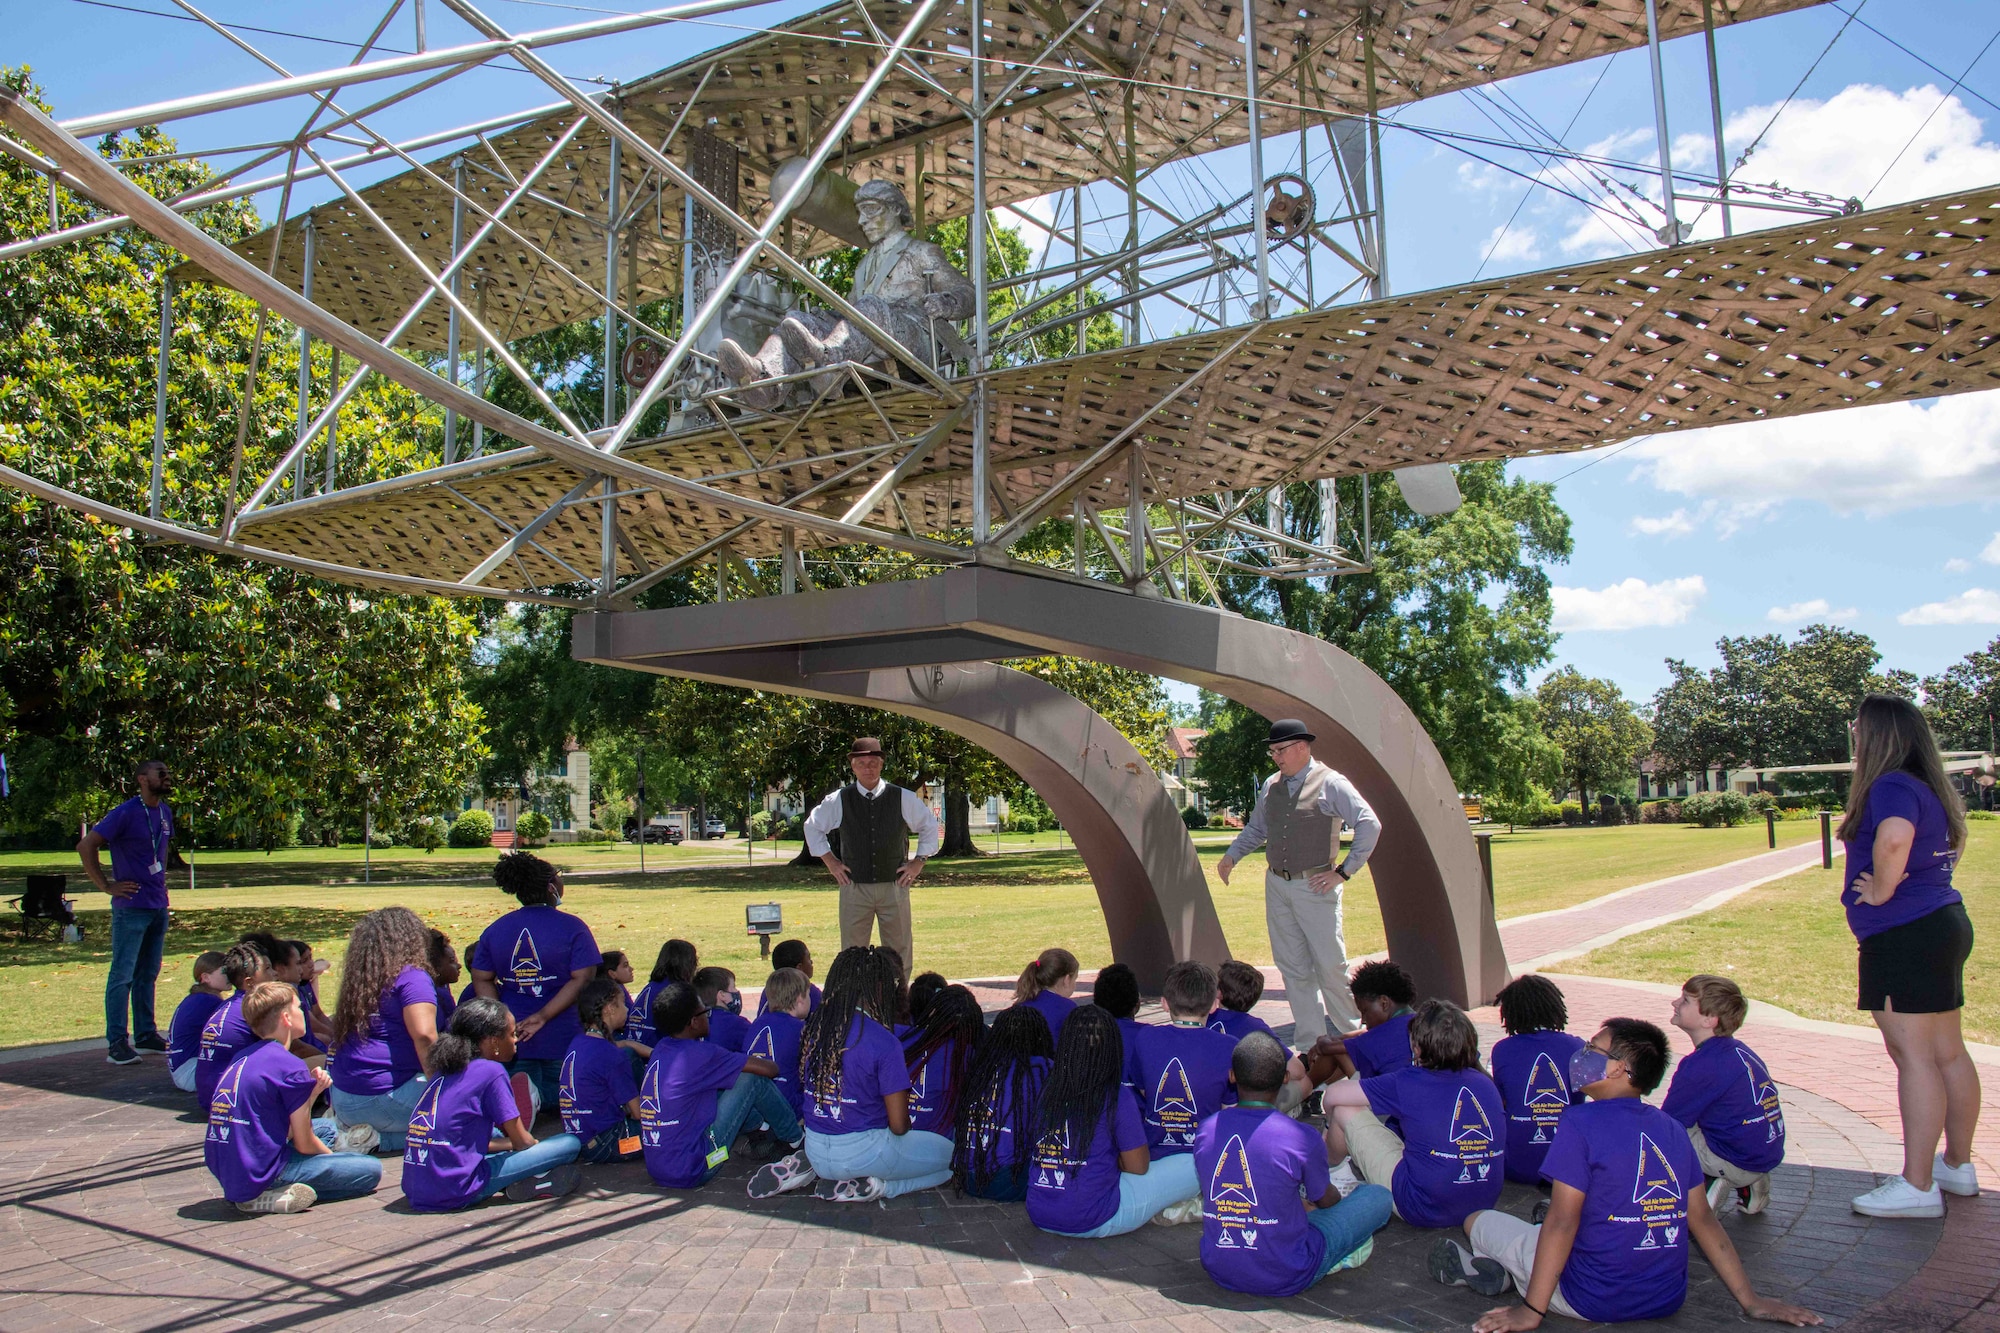 Maxwell AFB, Ala. – Elementary students from Bear Exploration Center For Mathematics, Science and Technology School perch in the shade of the Wright Flyer replica as they learn about the history of aviation from “Orville” and “Wilbur Wright,” May 13, 2022. (US Air Force photo by Melanie Rodgers Cox/Released)